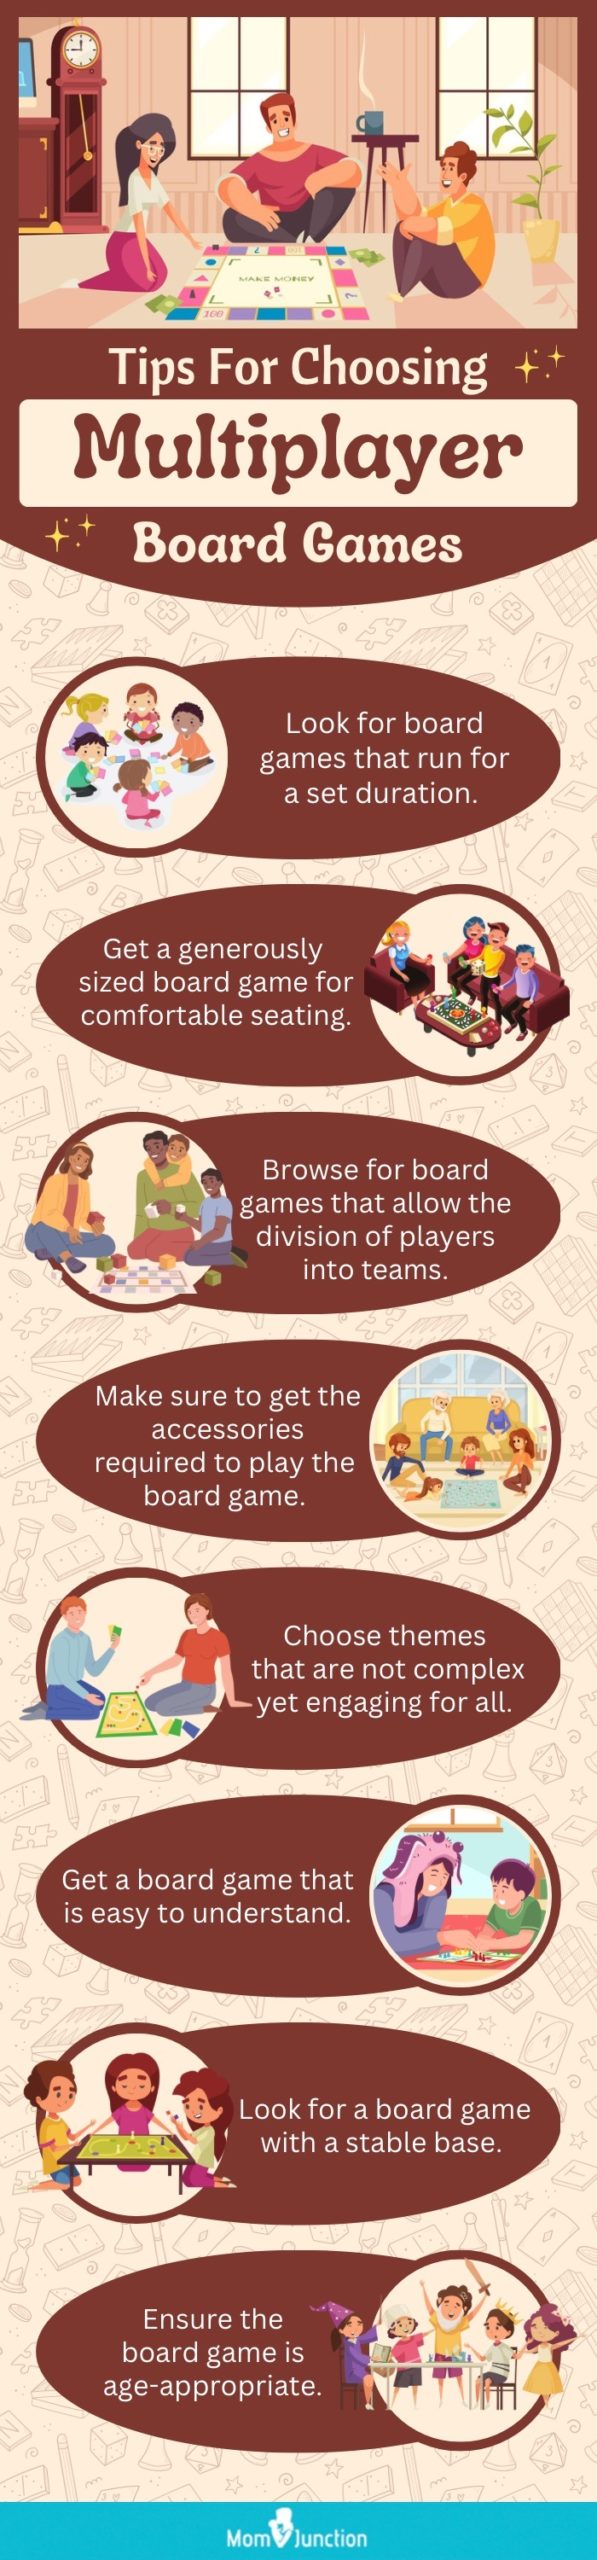 Tips For Choosing Multiplayer Board Games (Infographic)